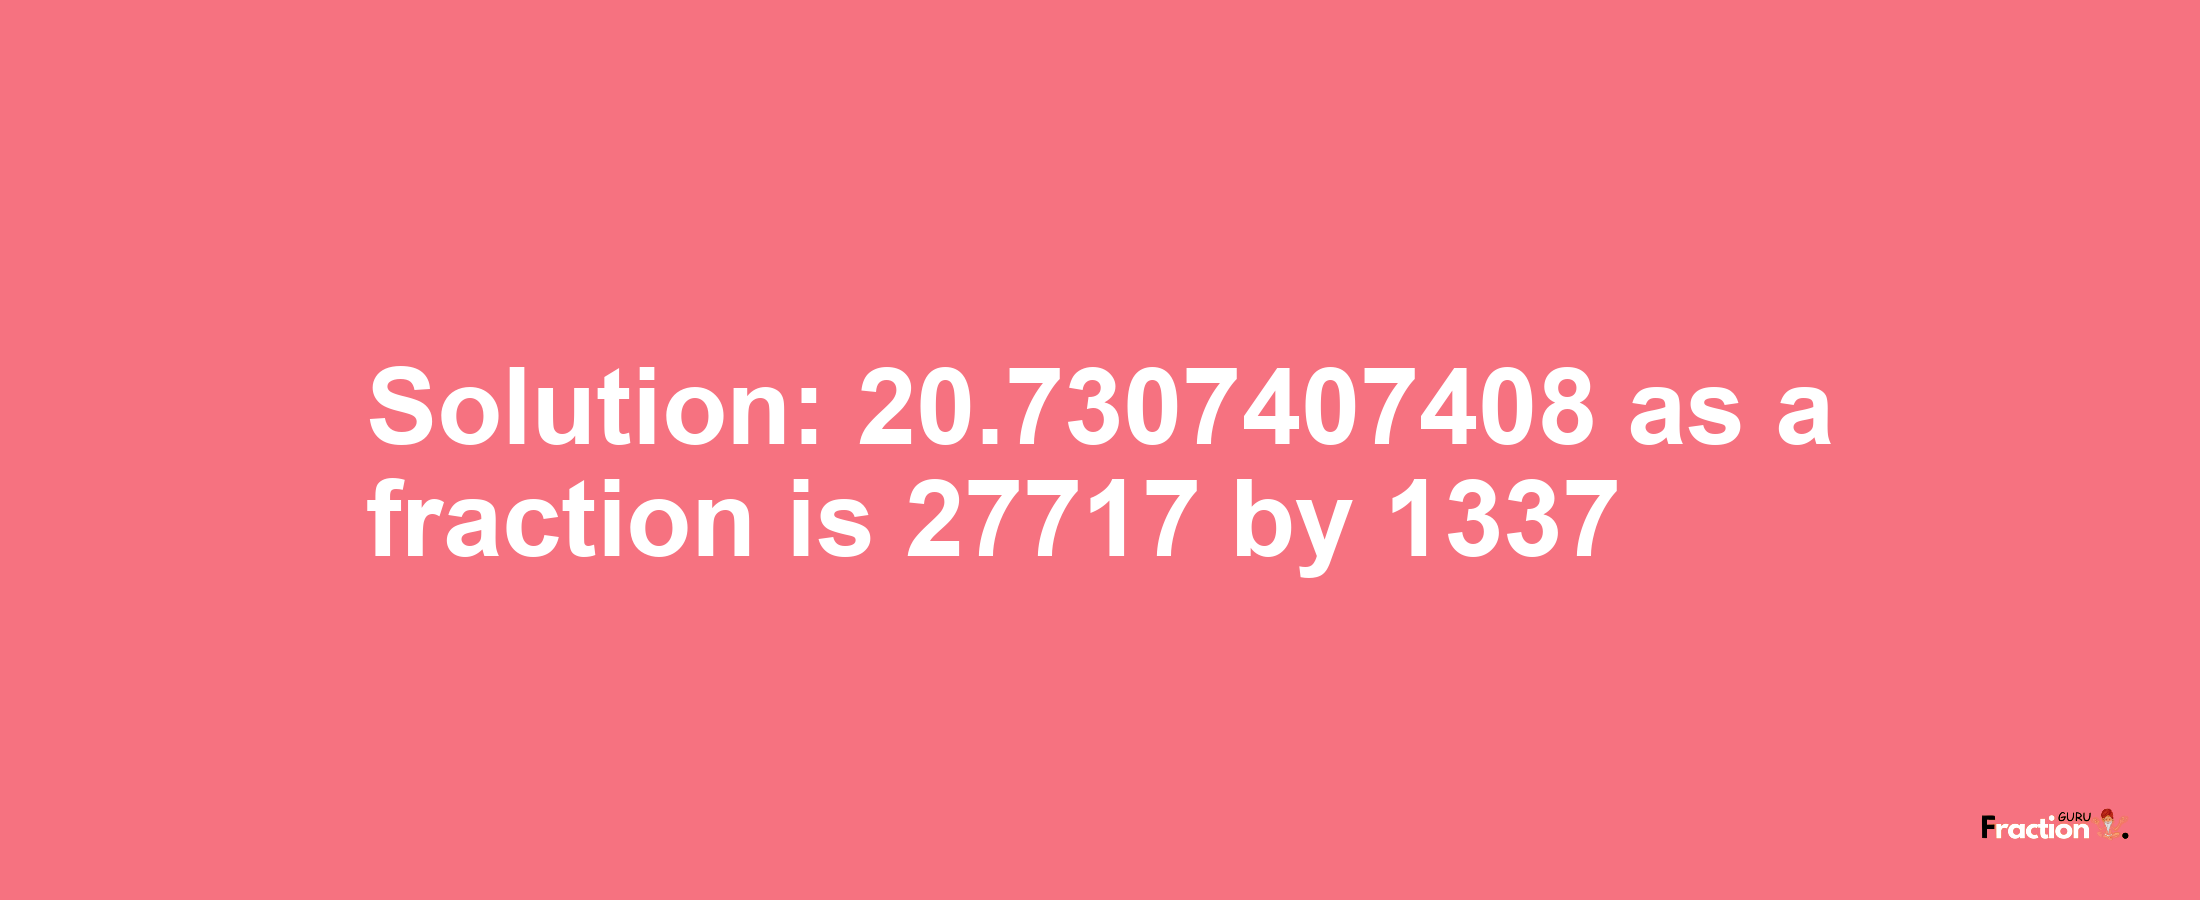 Solution:20.7307407408 as a fraction is 27717/1337